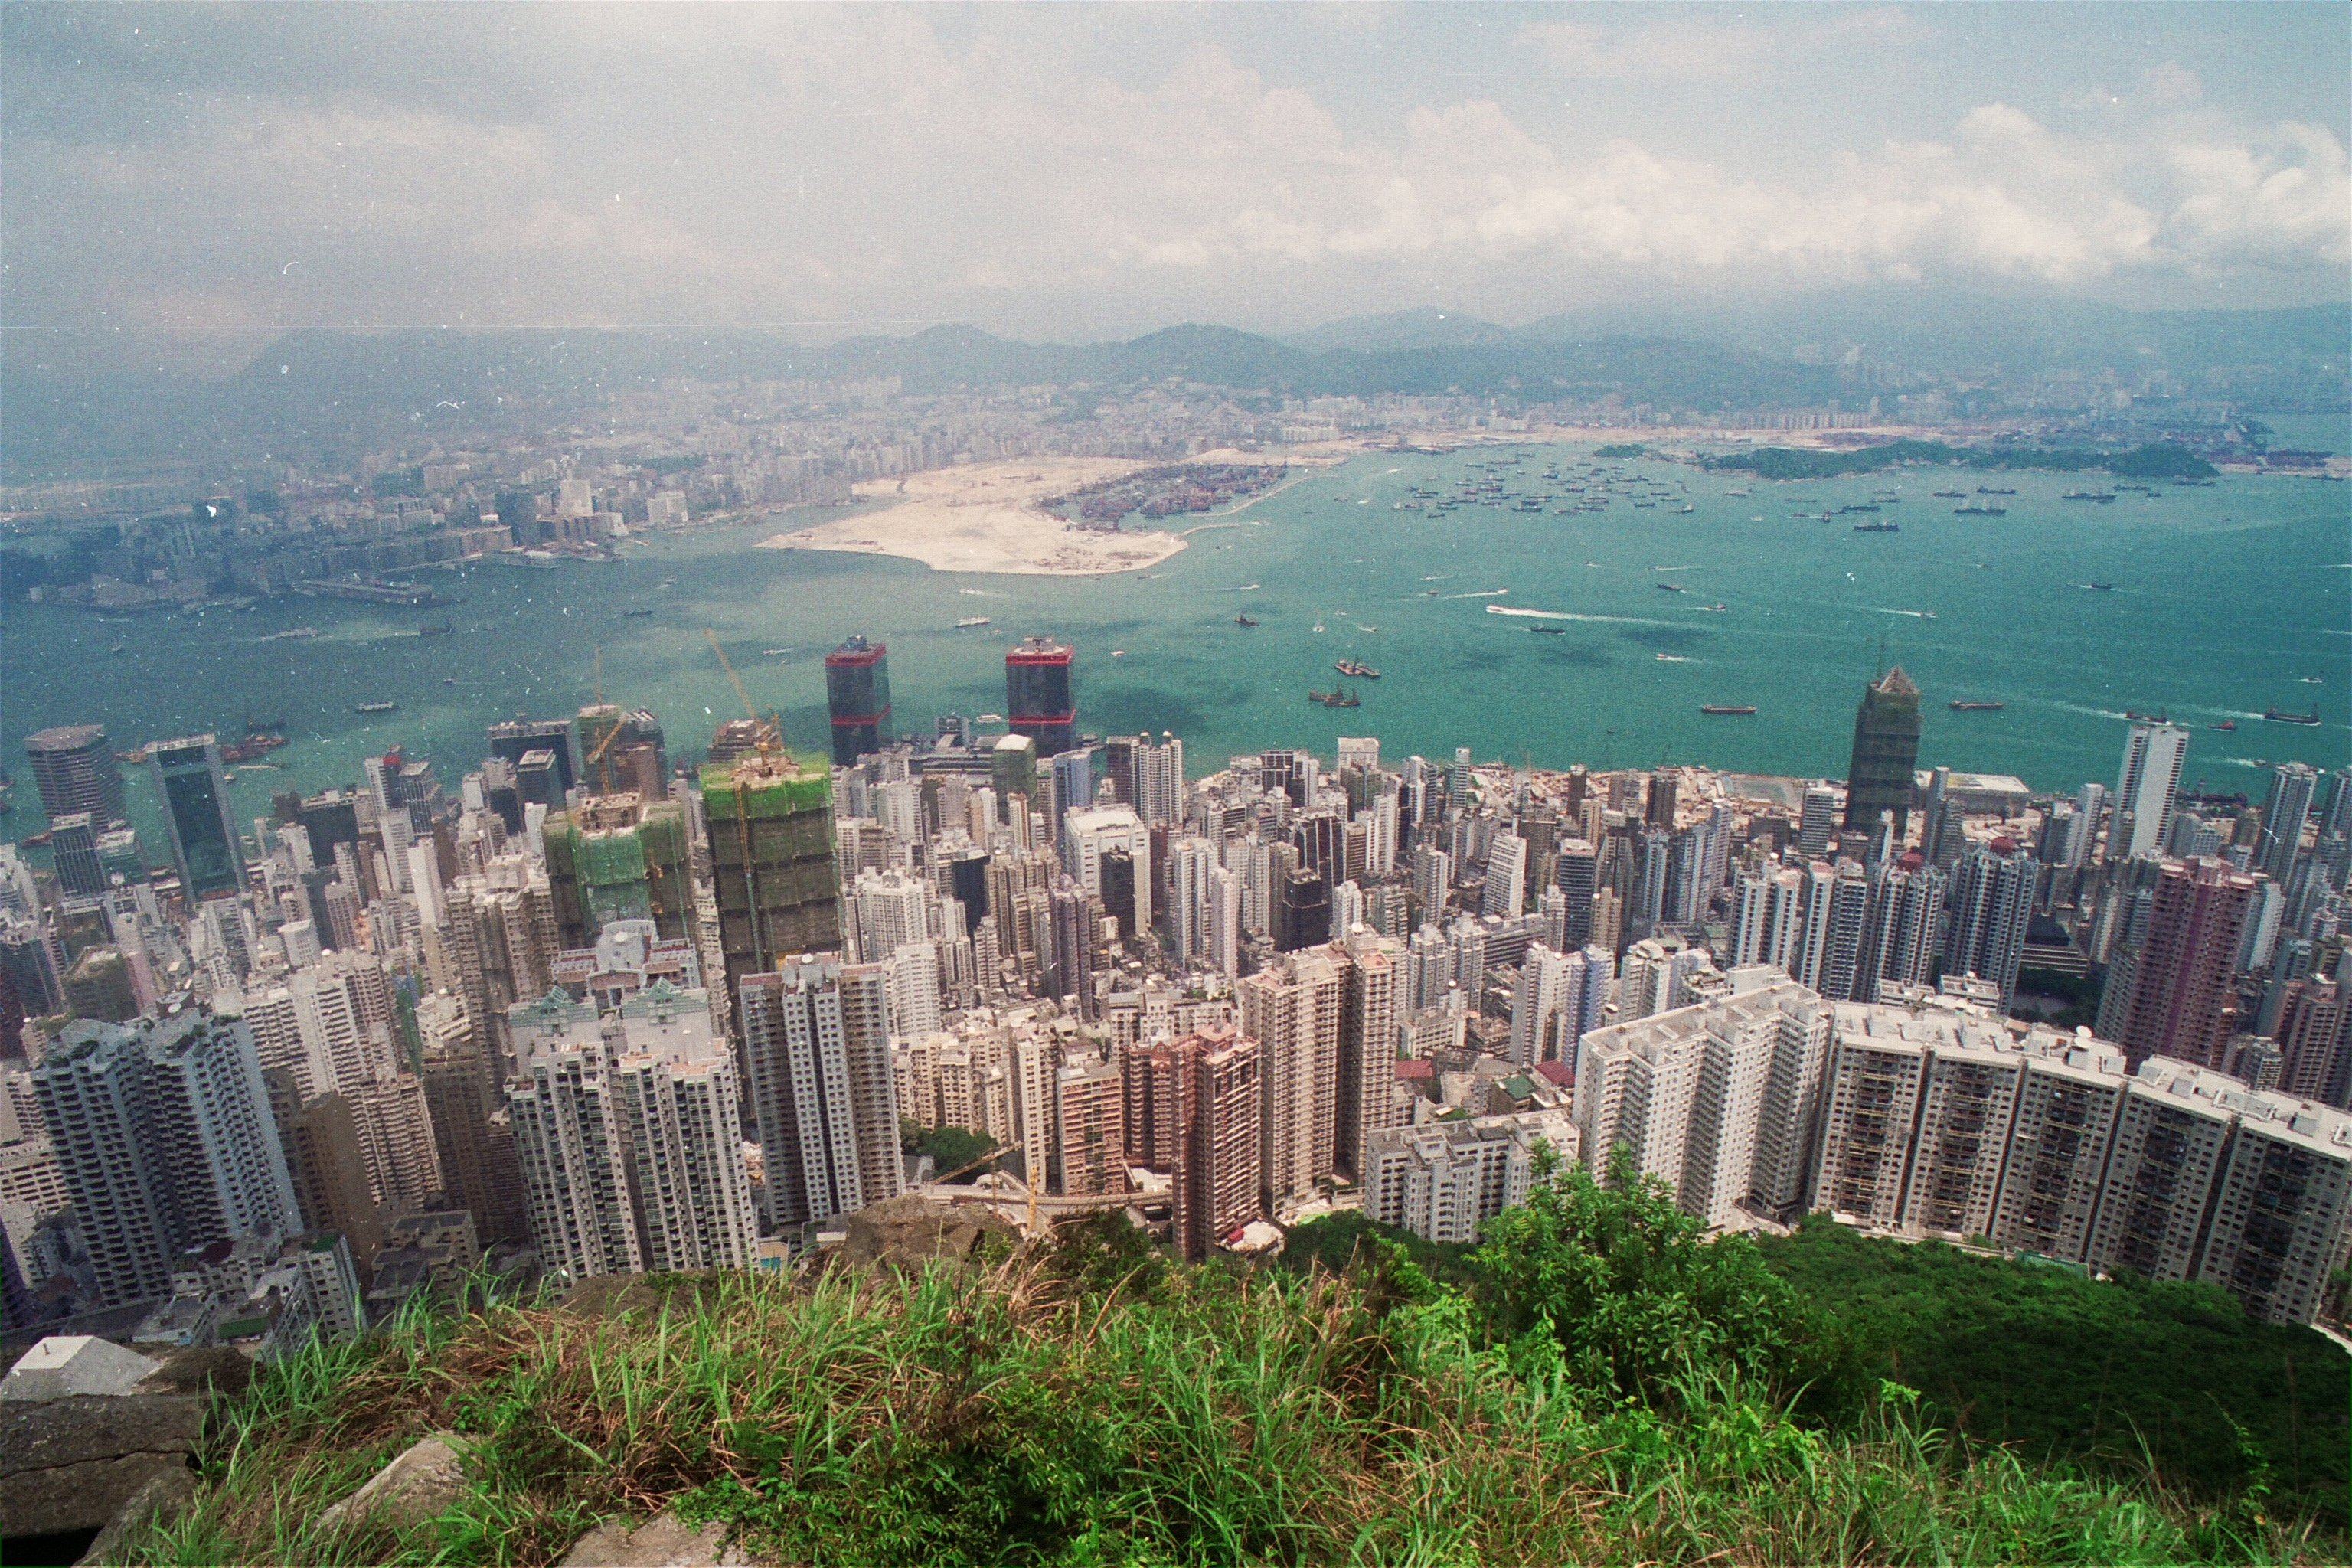 Looking down on Central, Hong Kong, in the mid-1990s. For many years little changed except the skyline. Photo: SCMP